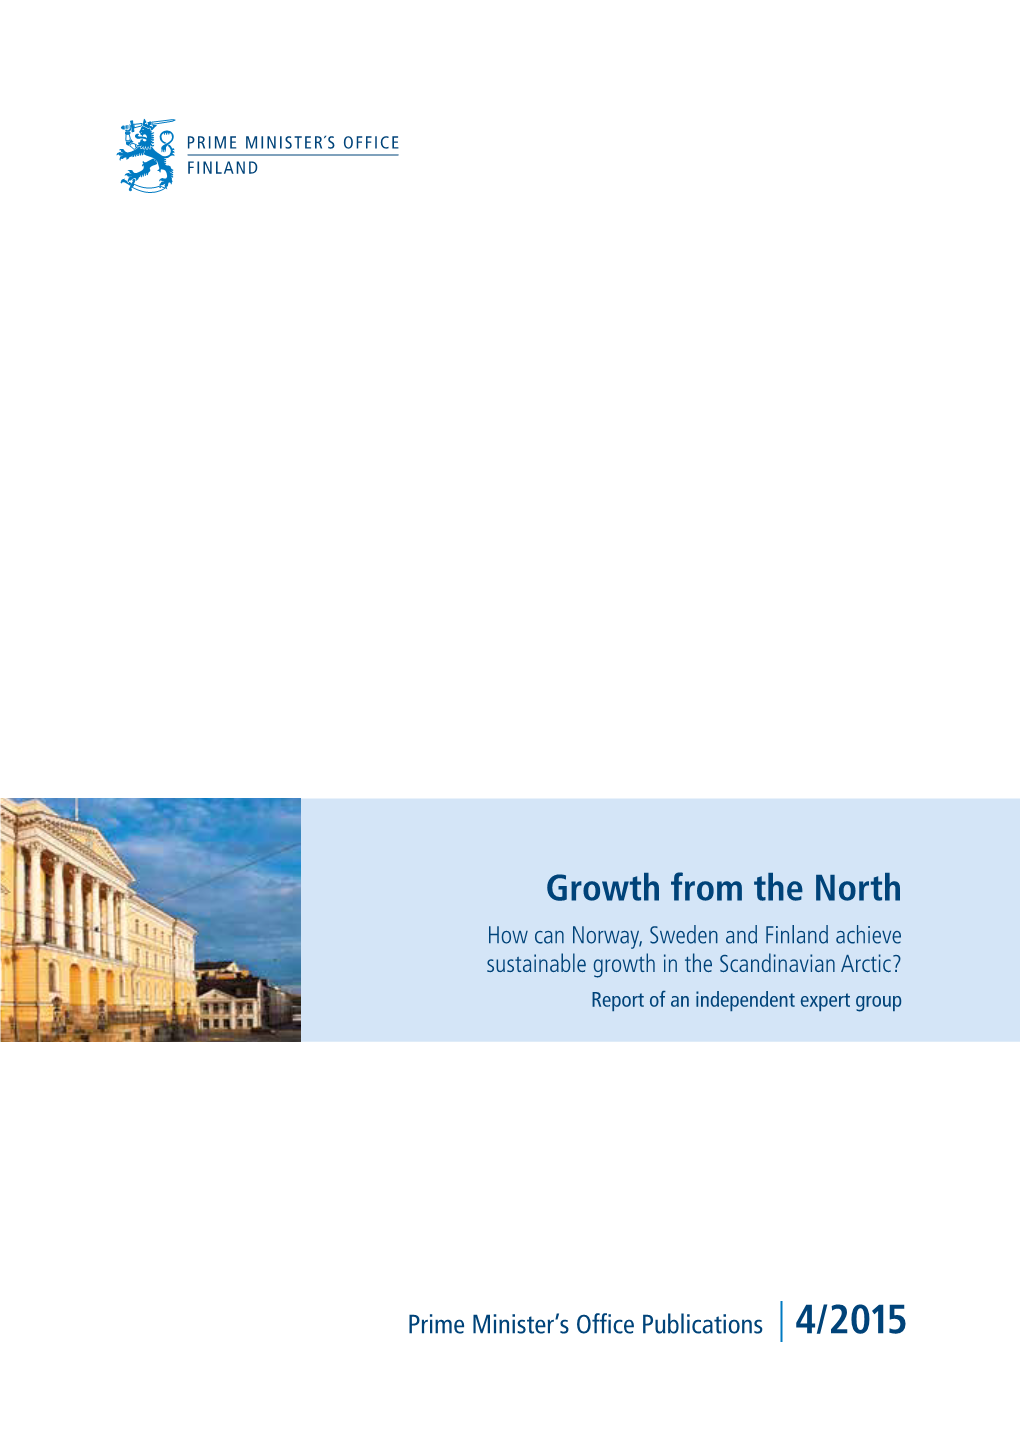 Growth from the North How Can Norway, Sweden and Finland Achieve Sustainable Growth in the Scandinavian Arctic? Report of an Independent Expert Group